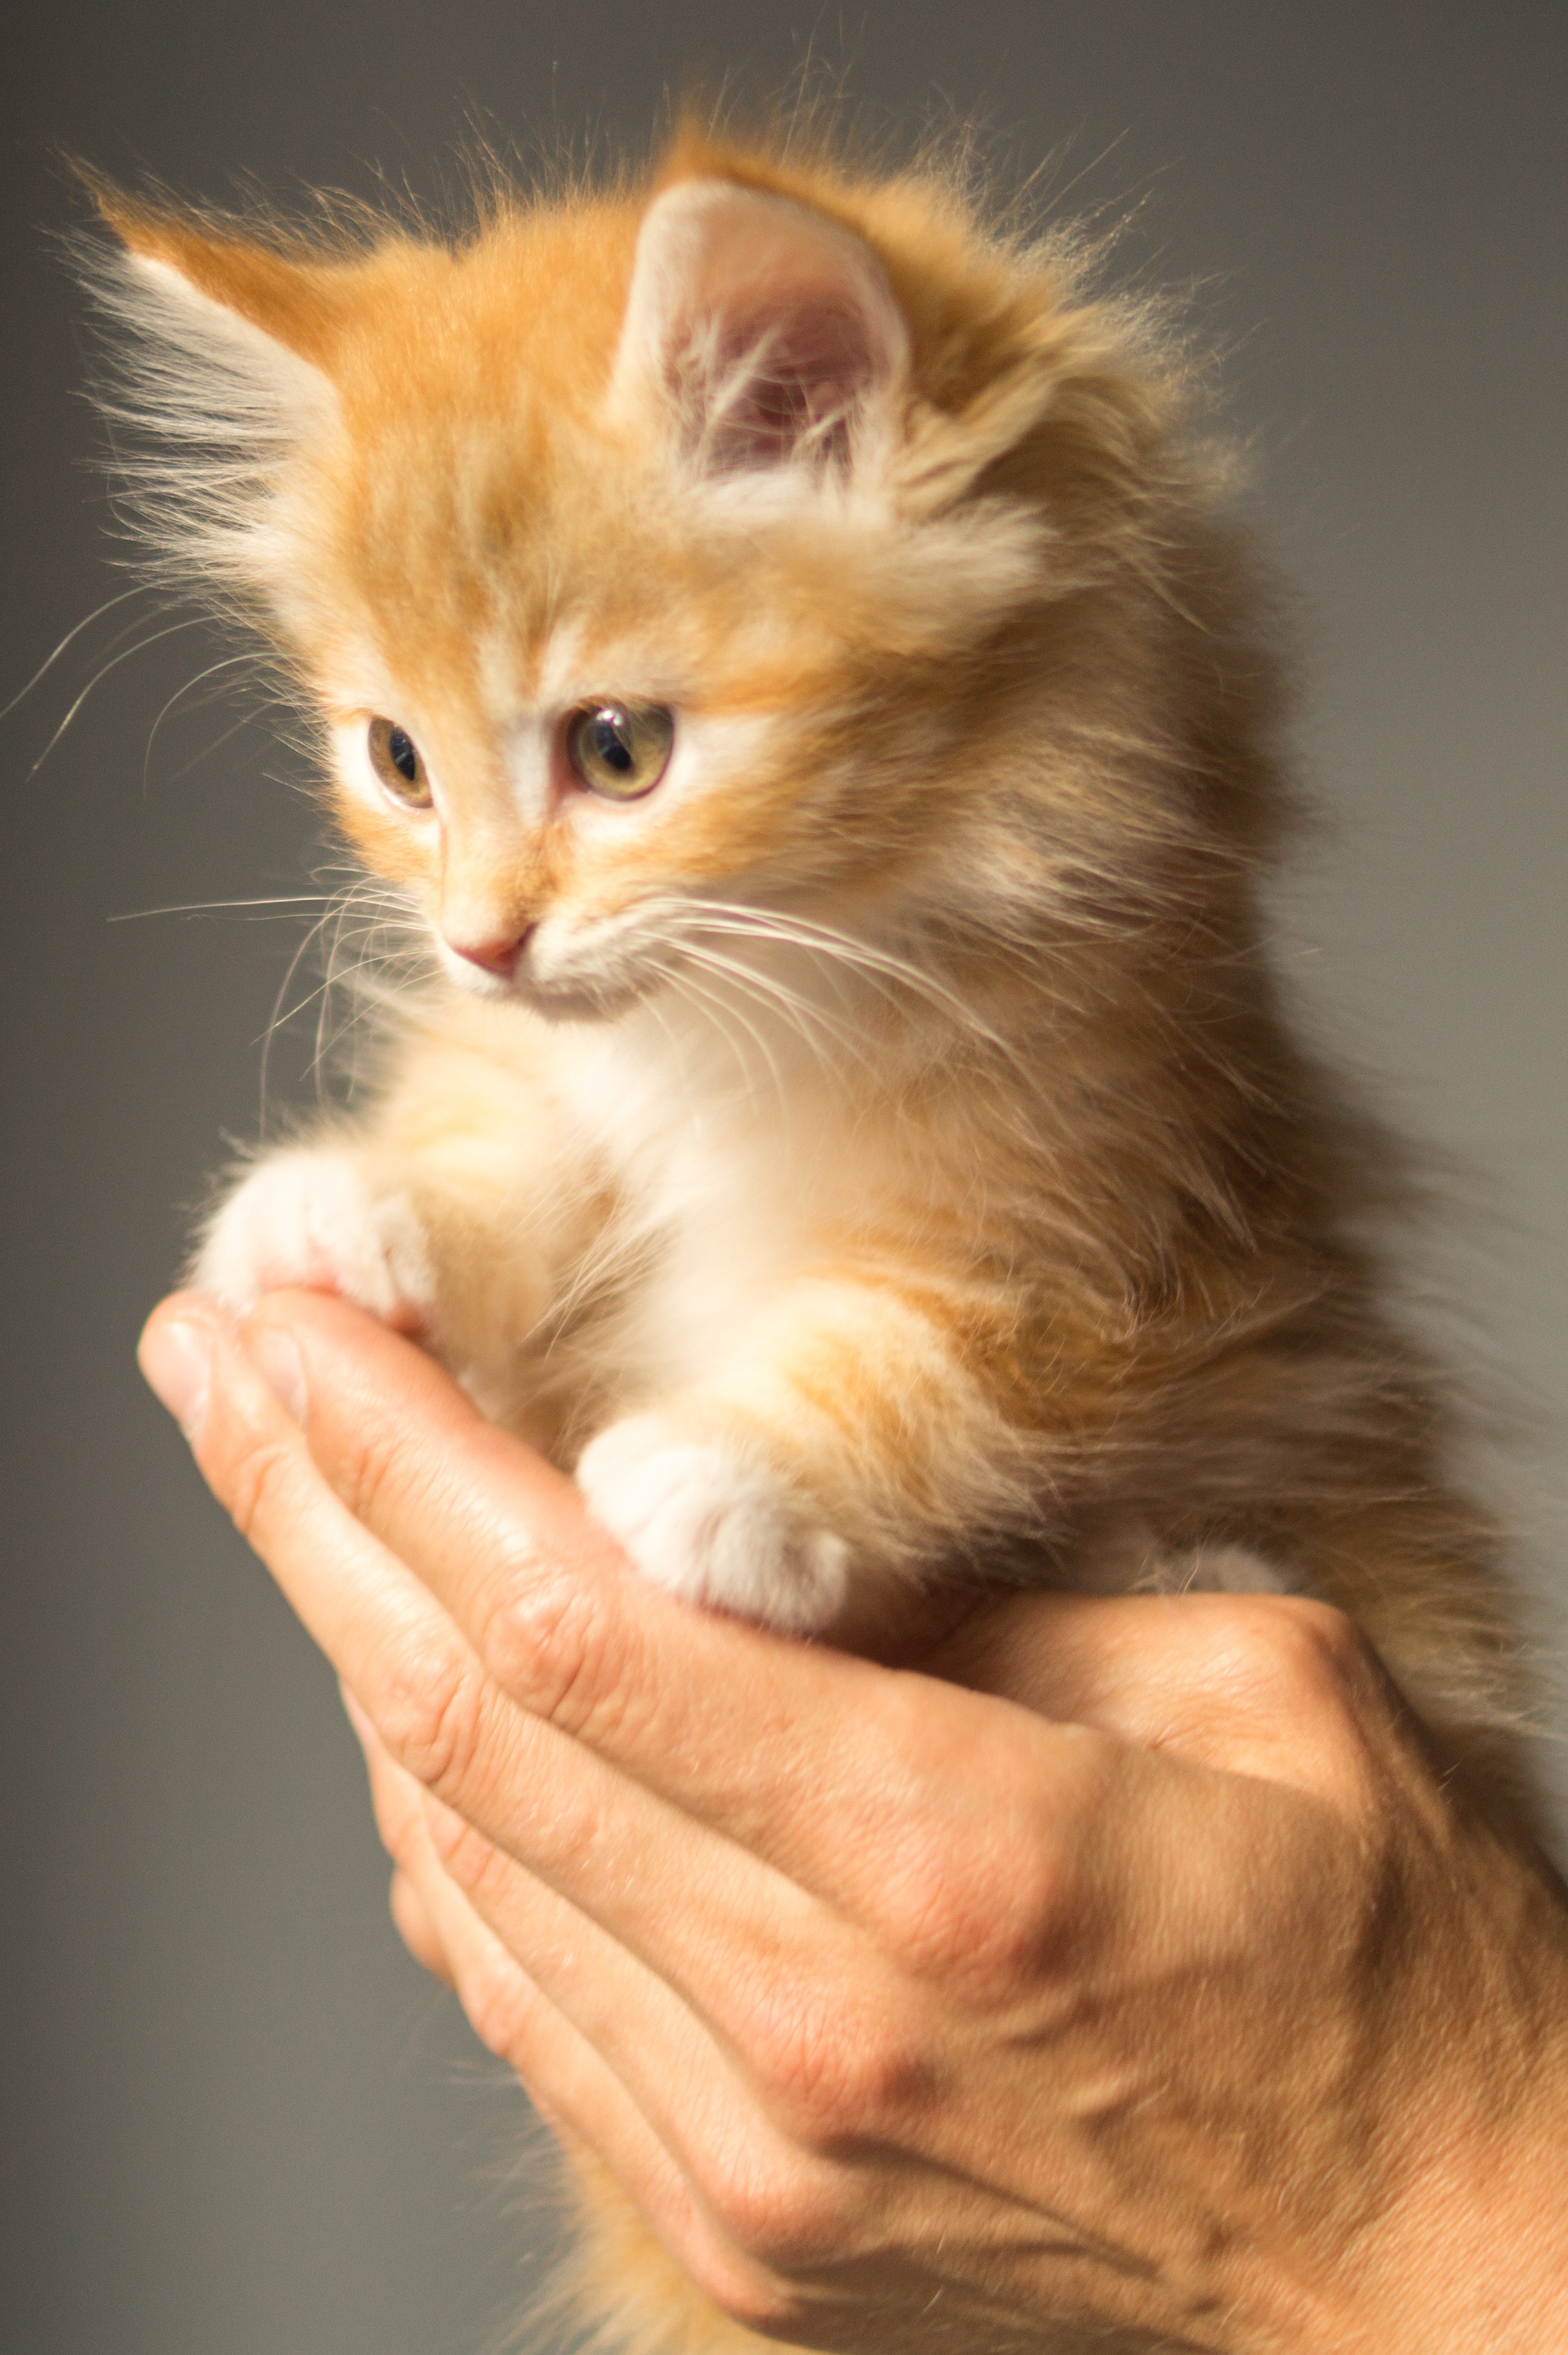 Free photo Wallpaper with cute ginger kitten in hands